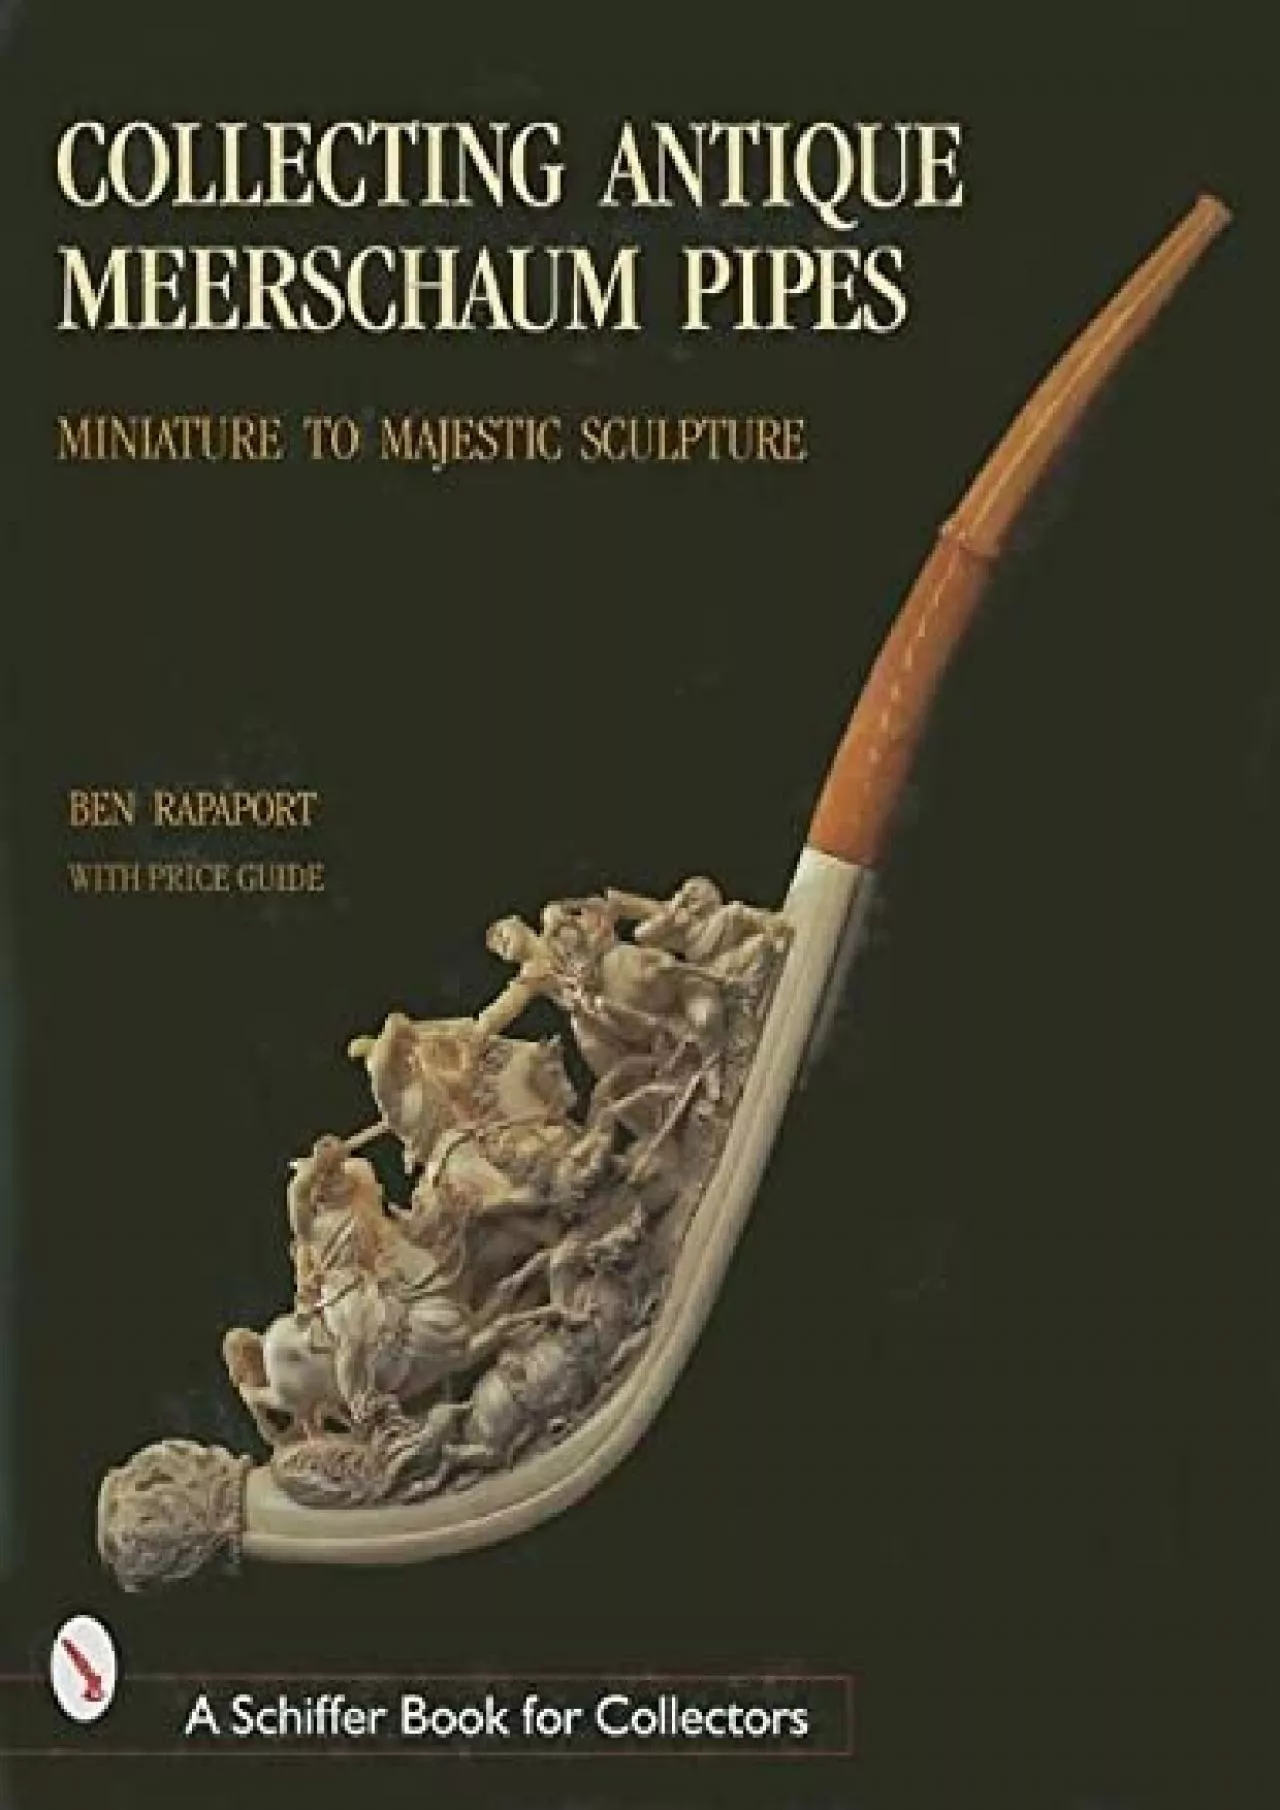 [EBOOK]-Collecting Antique Meerschaum Pipes: Miniature to Majestic Sculpture (A Schiffer